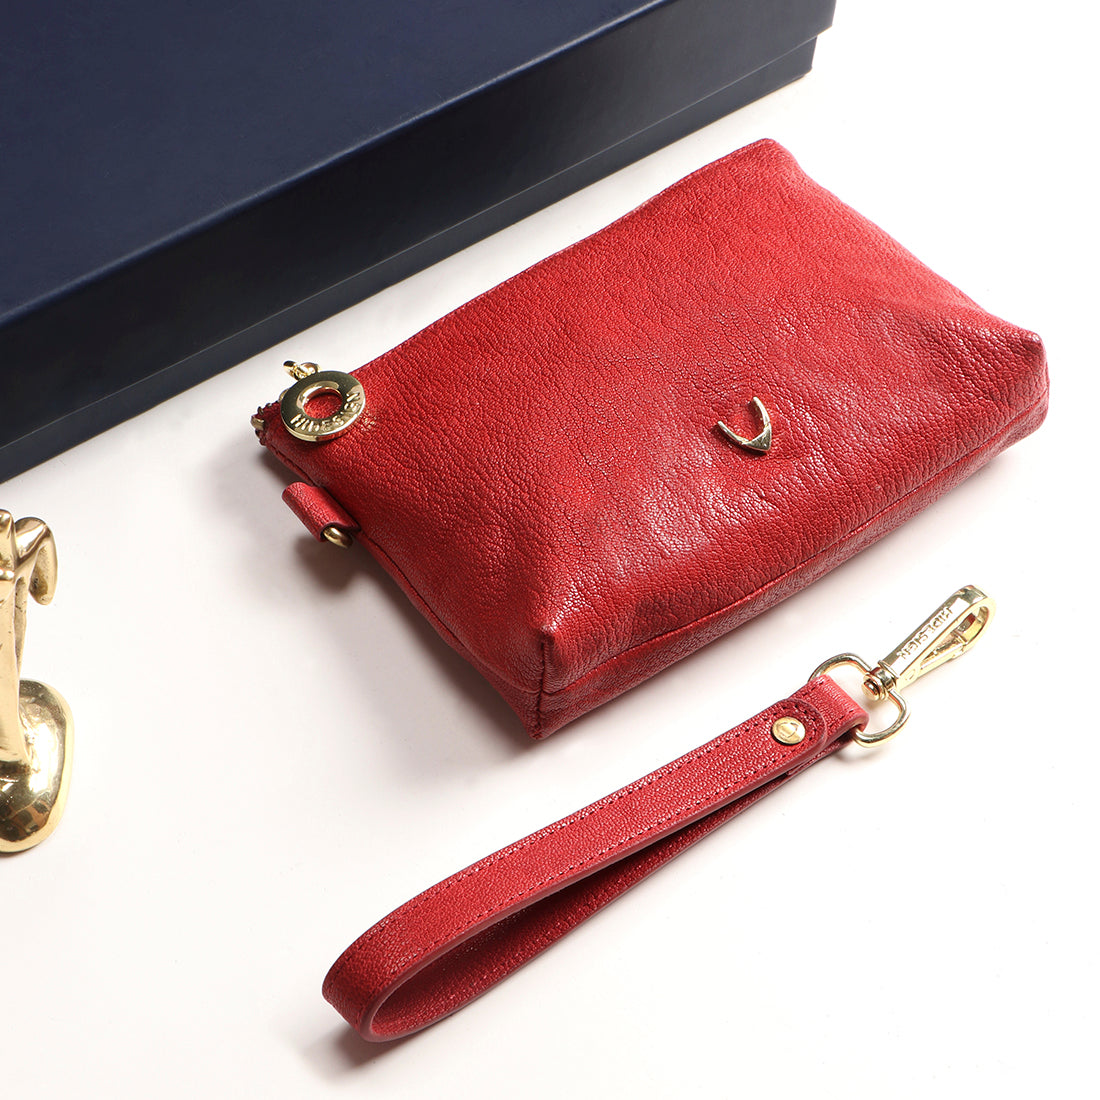 Standard Leather Envelope Clutch Bag – The Leather Satchel Co. (USA)